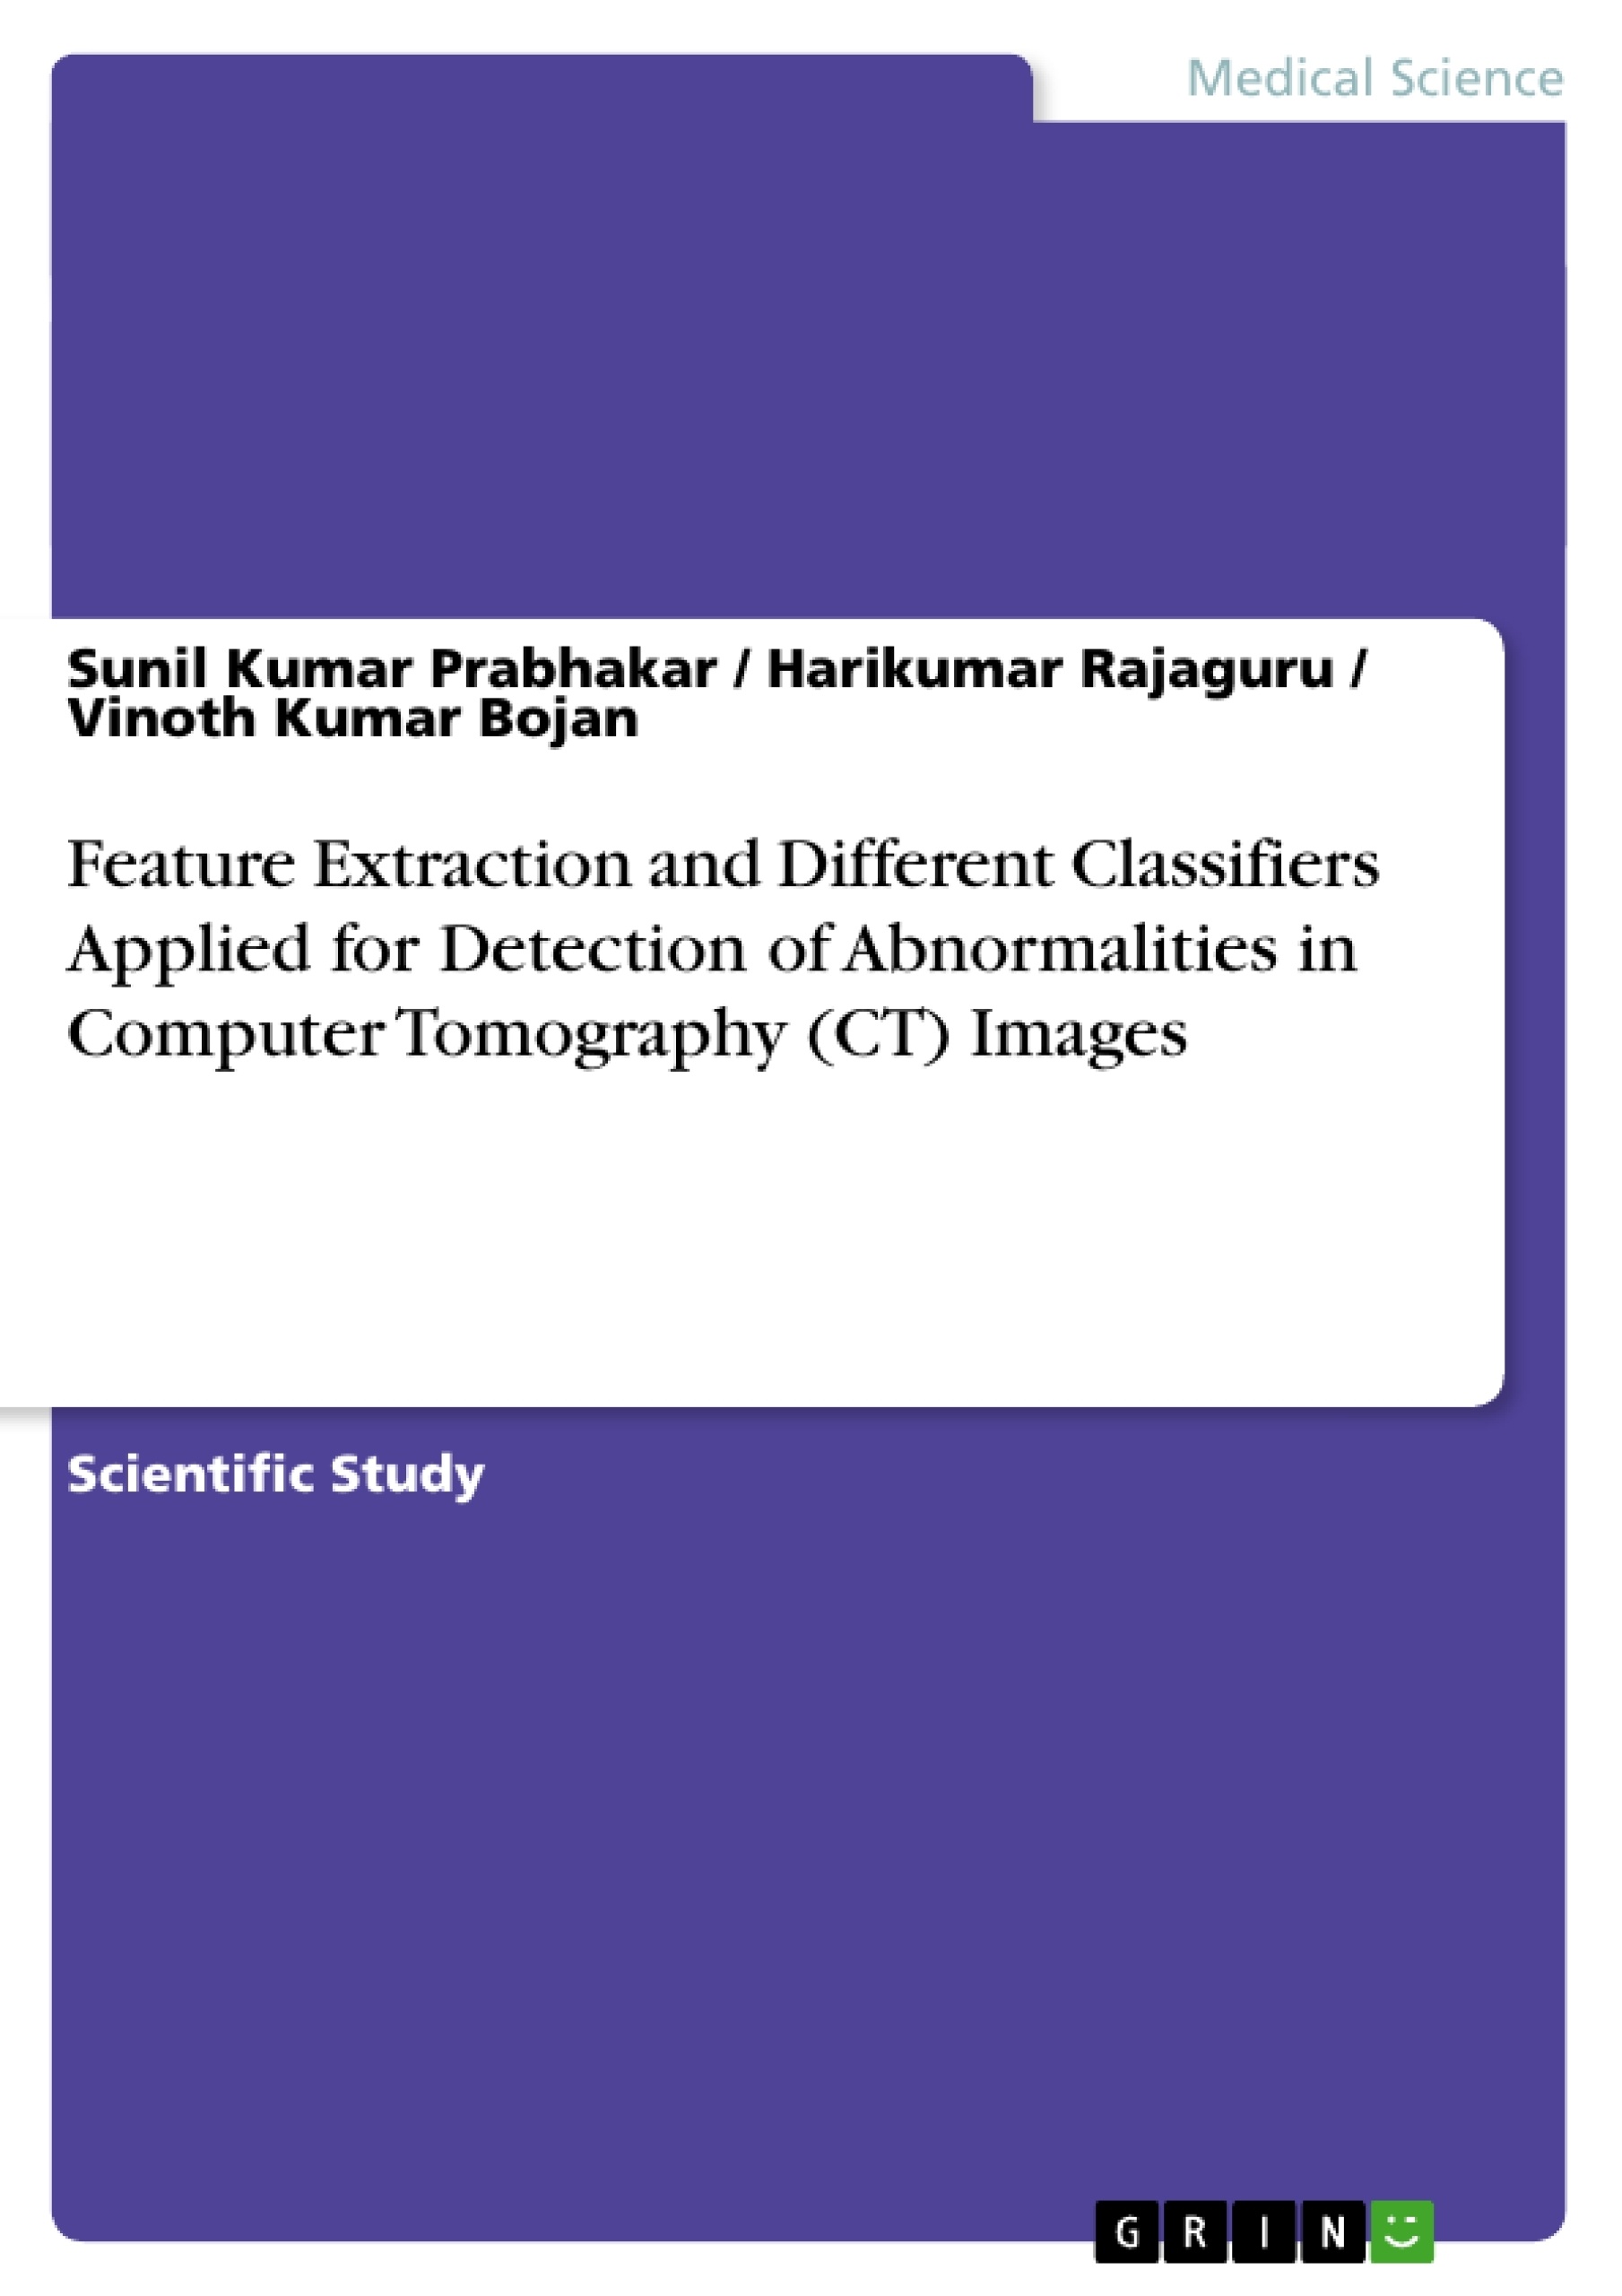 Title: Feature Extraction and Different Classifiers Applied for Detection of Abnormalities in Computer Tomography (CT) Images